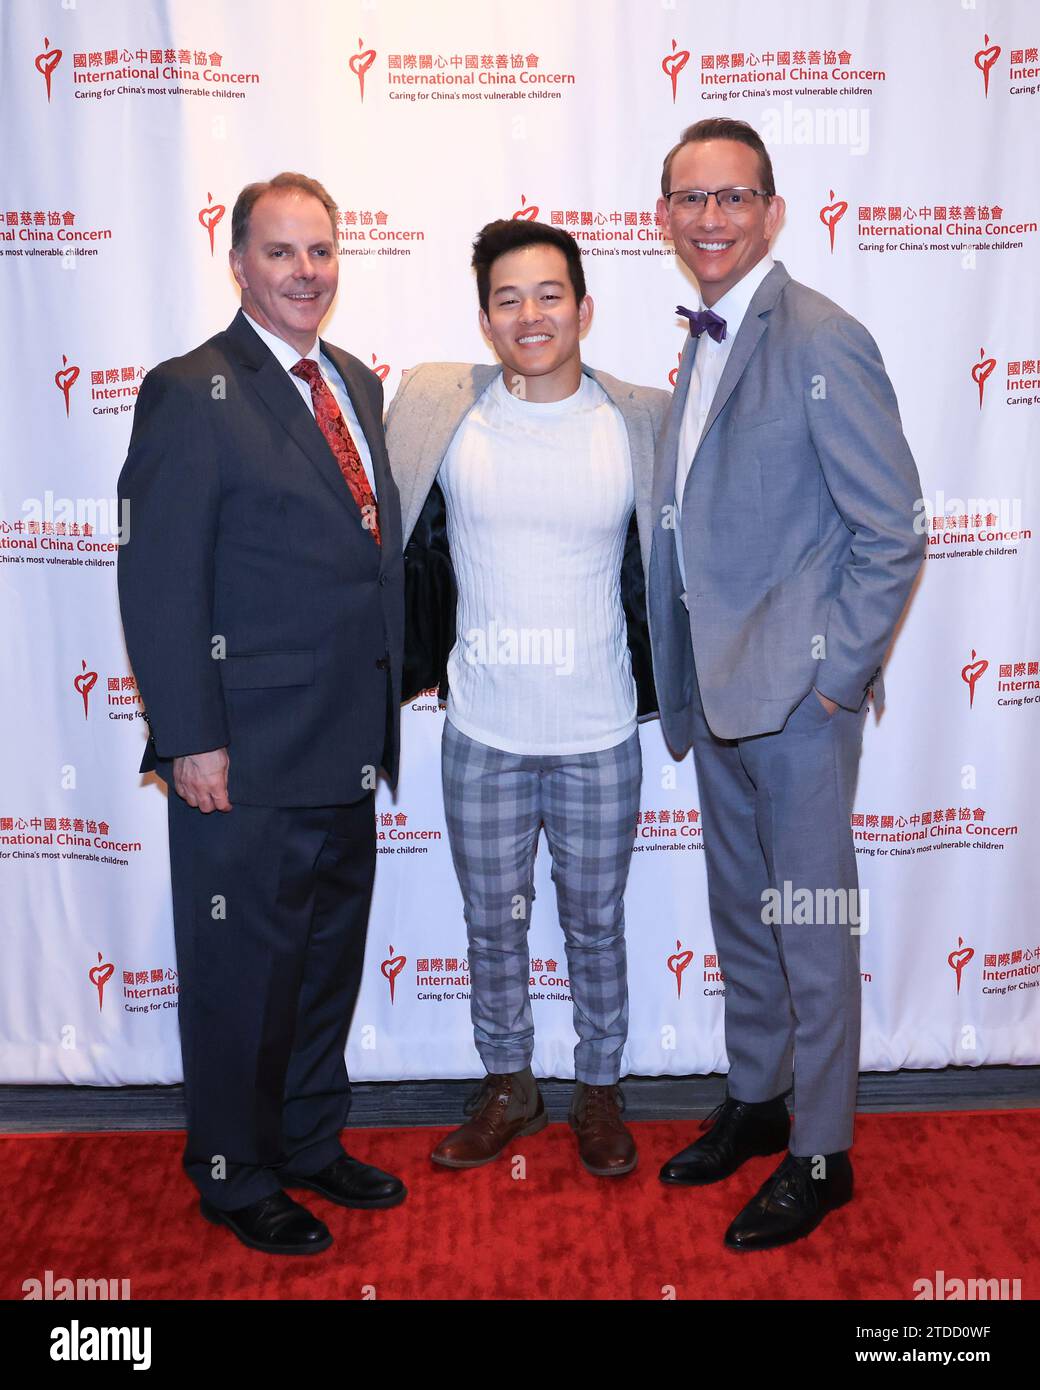 Newport Beach, California, USA. 10th December, 2023. Ken Smith, Chairman of the American Friends of ICC (AFICC), Keegan Ferrell, singer/performer, and David Gotts, Founder of ICC, attending International China Concern 30th Anniversary Celebration Gala at the Renaissance Newport Beach Hotel in Newport Beach, California. Credit: Sheri Determan Stock Photo